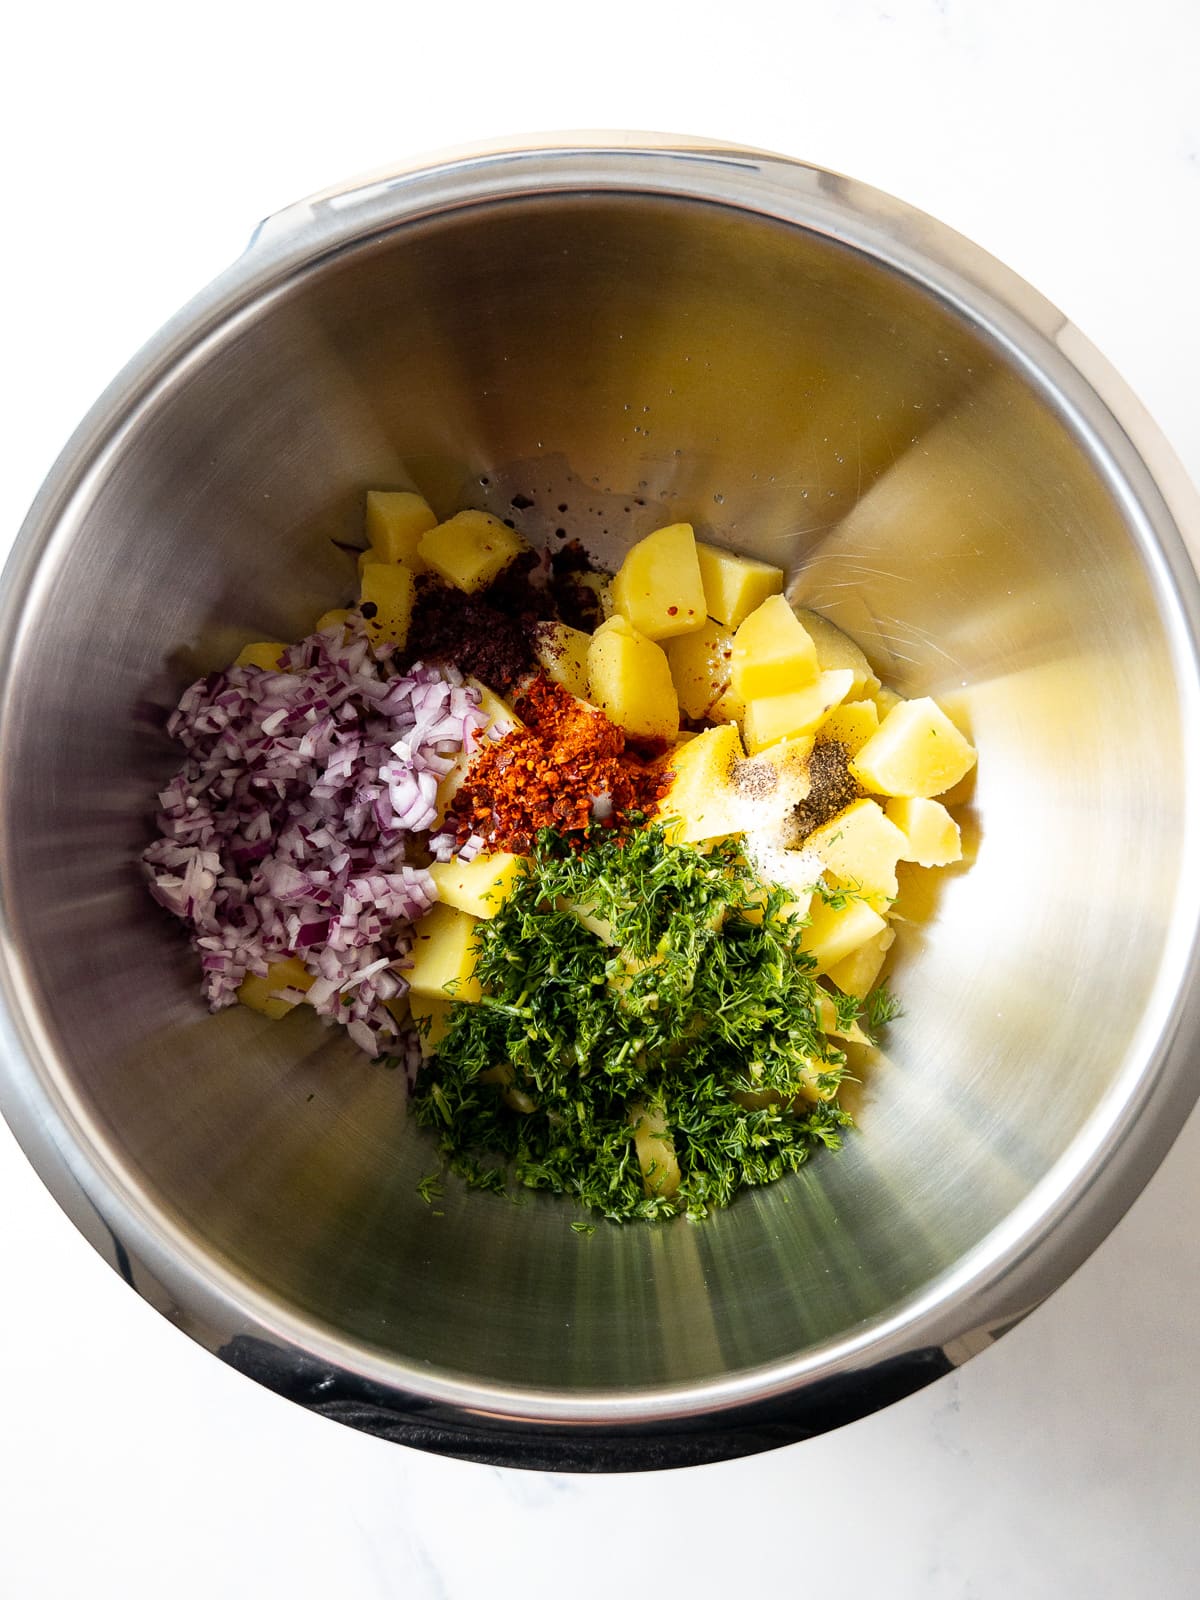 all ingredients for turkish dill potato salad in a large mixing bowl